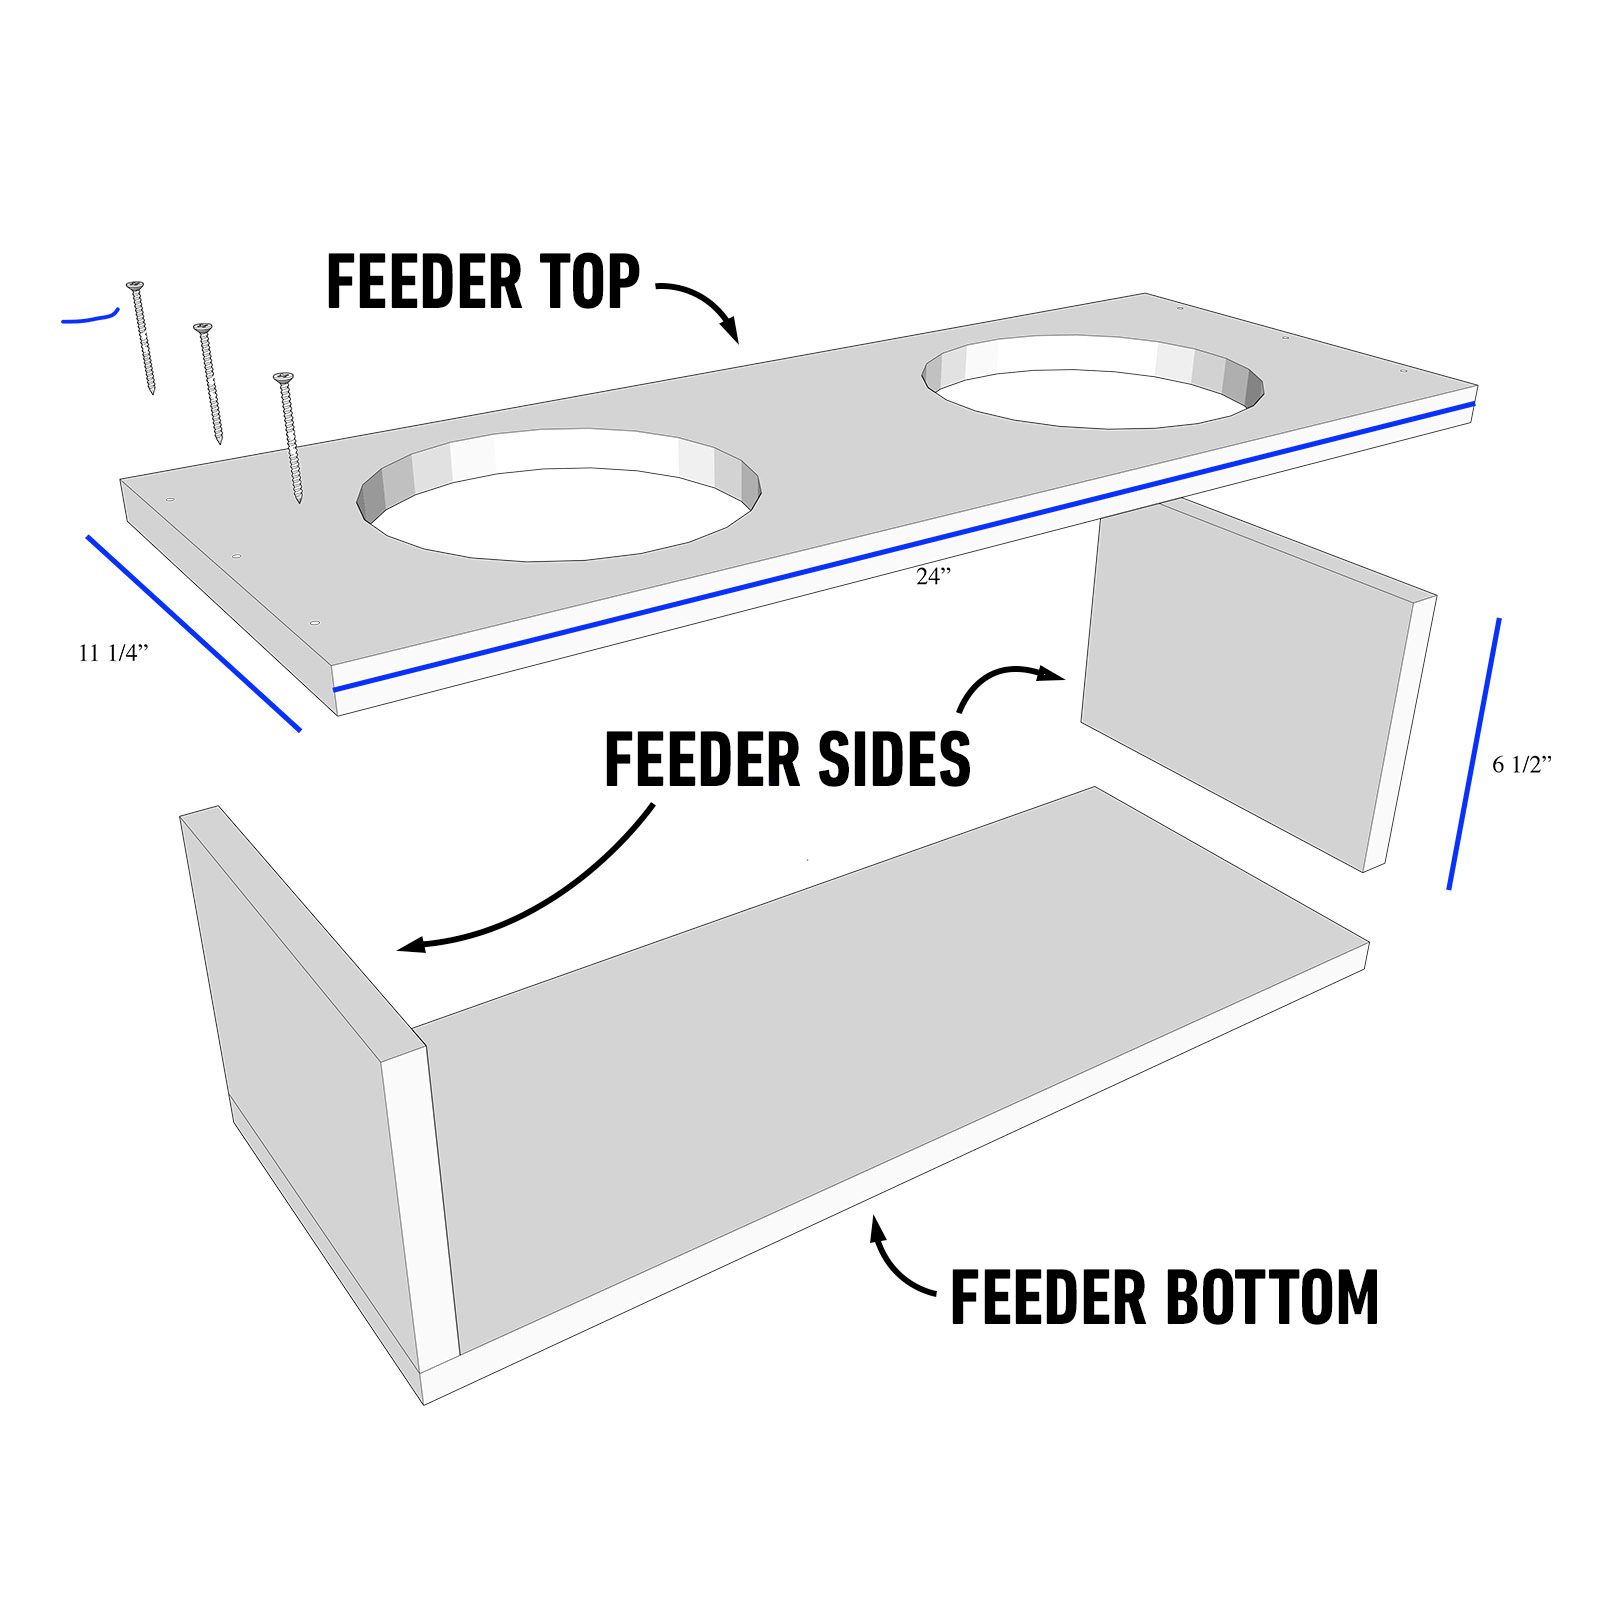 Dog Feeder Parts and dimensions